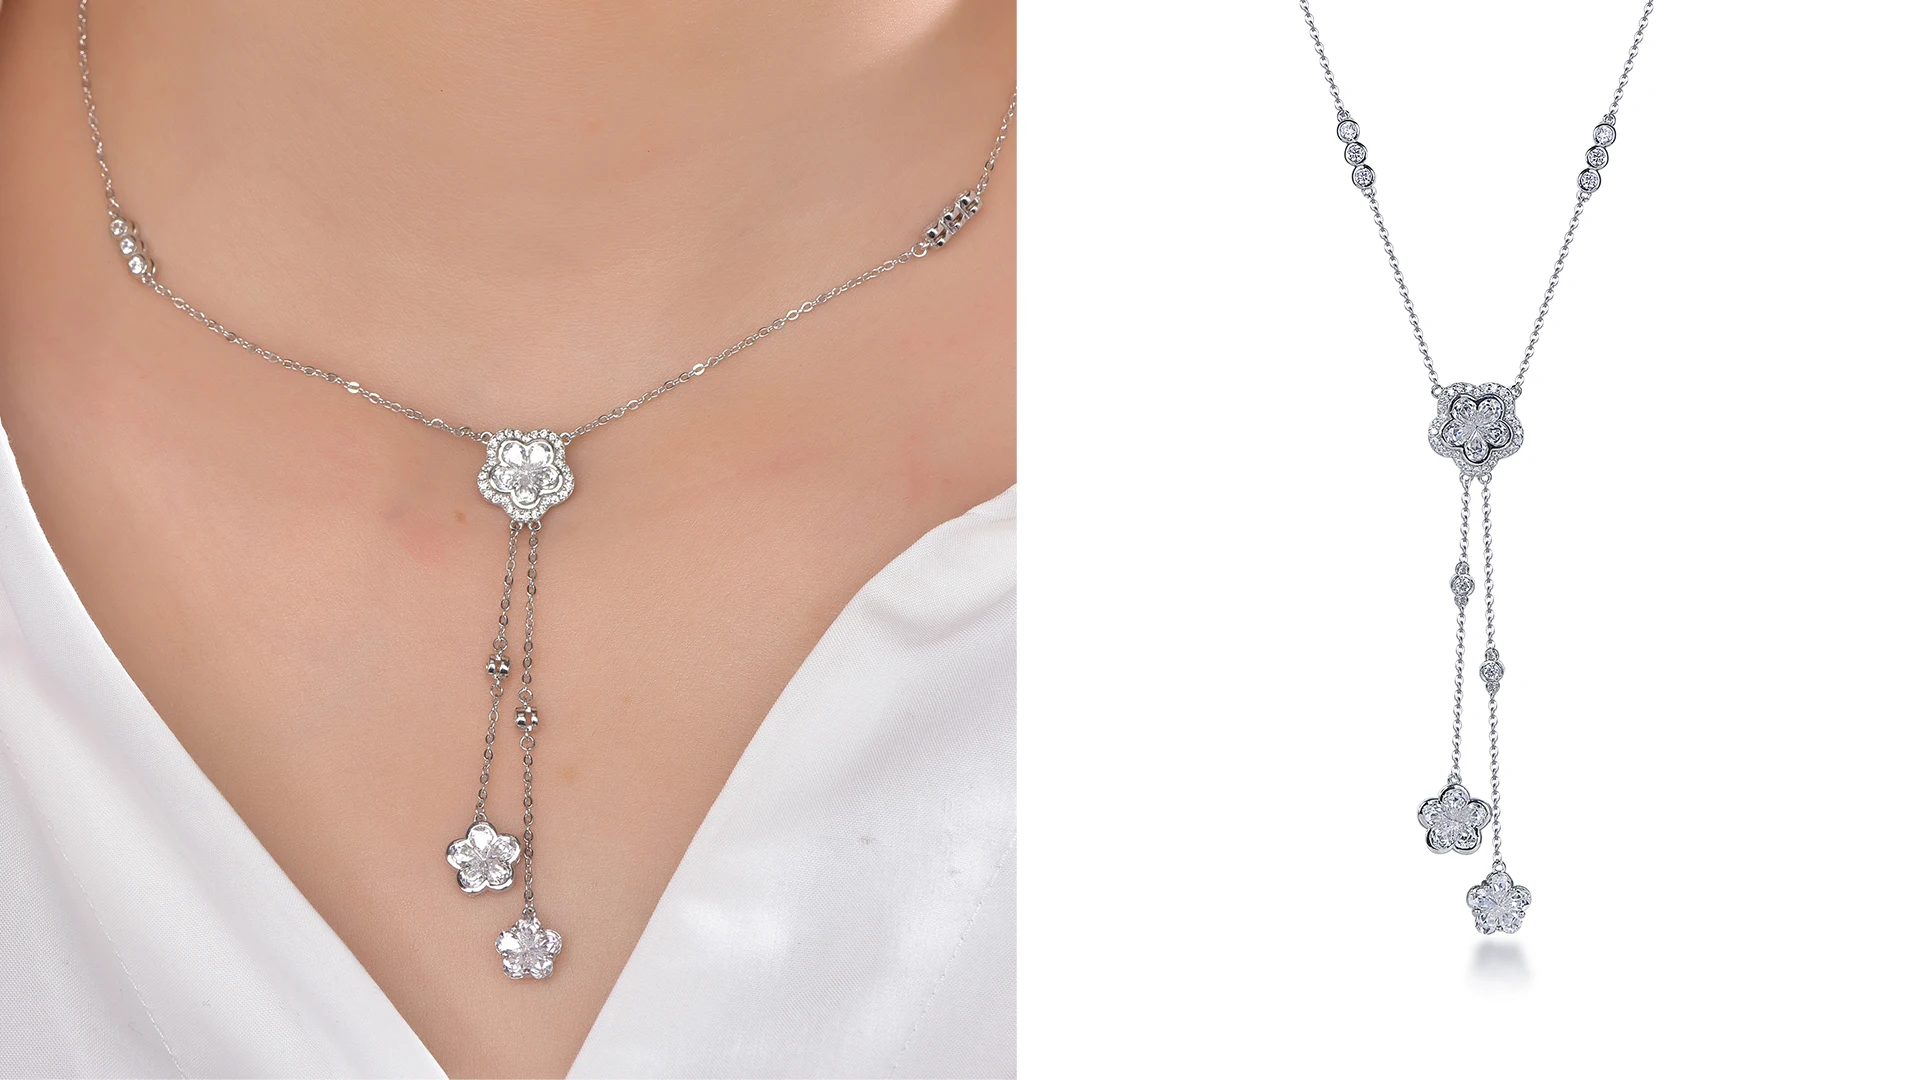 Collana Flower Statement Necklace Silver Tassel Necklace Flower Pendant AAA CZ 925 Silver Chain Necklace